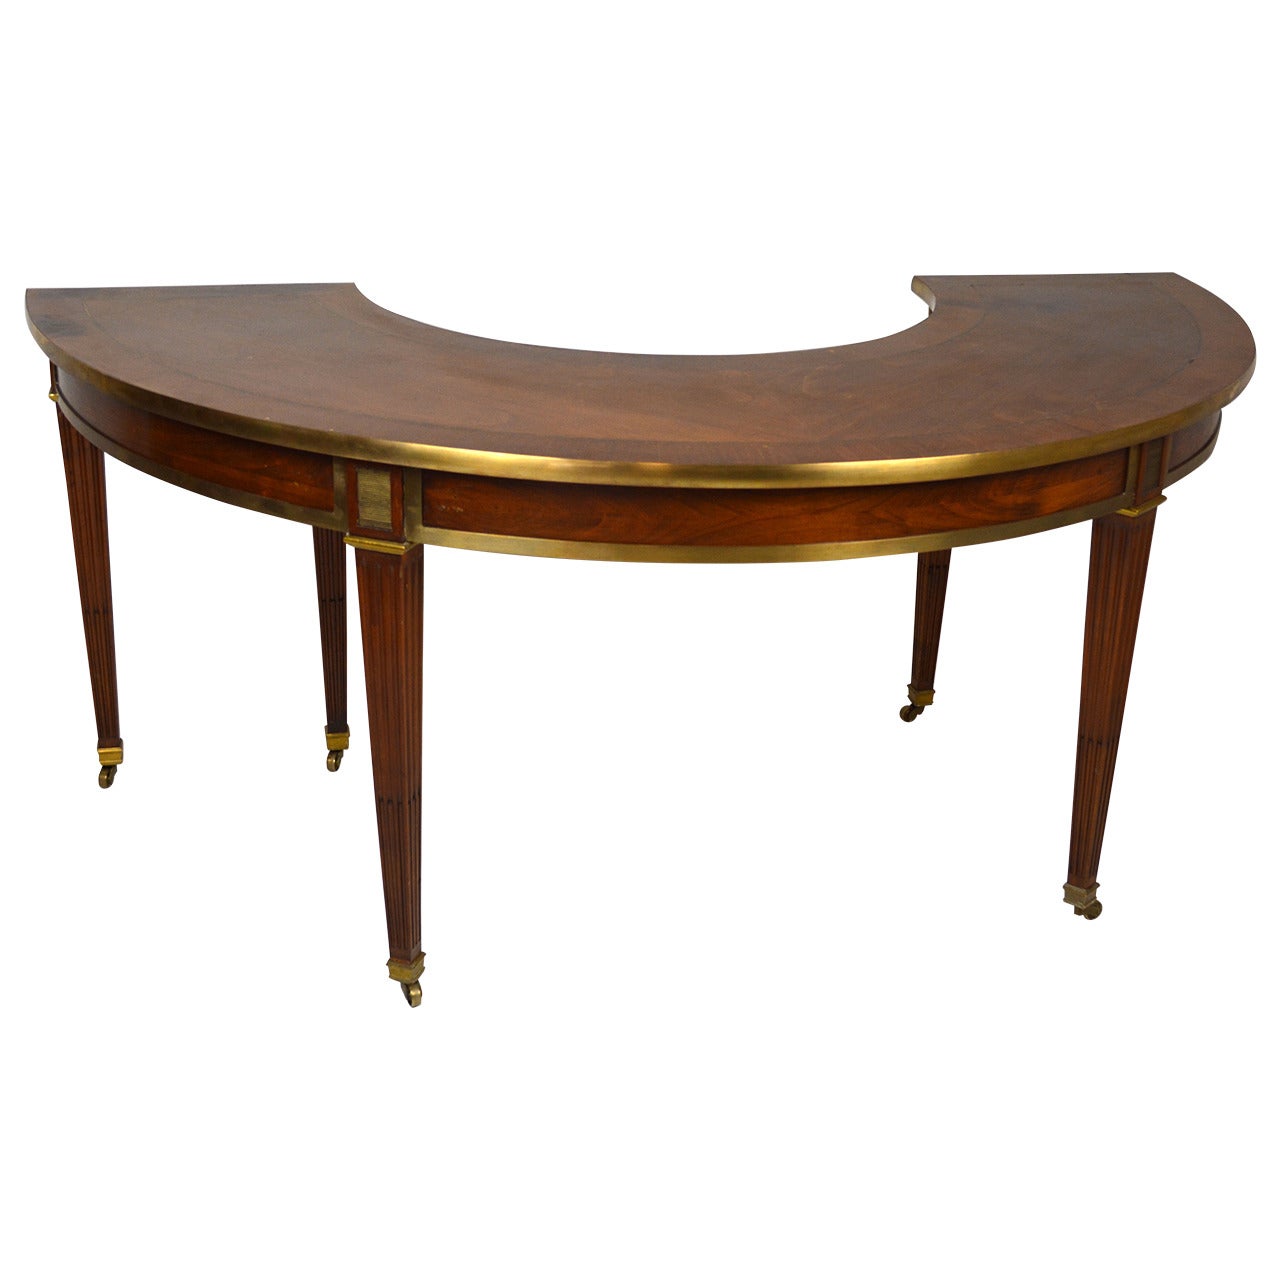 Elegant Neo-Classical Style Hunt Table or Desk